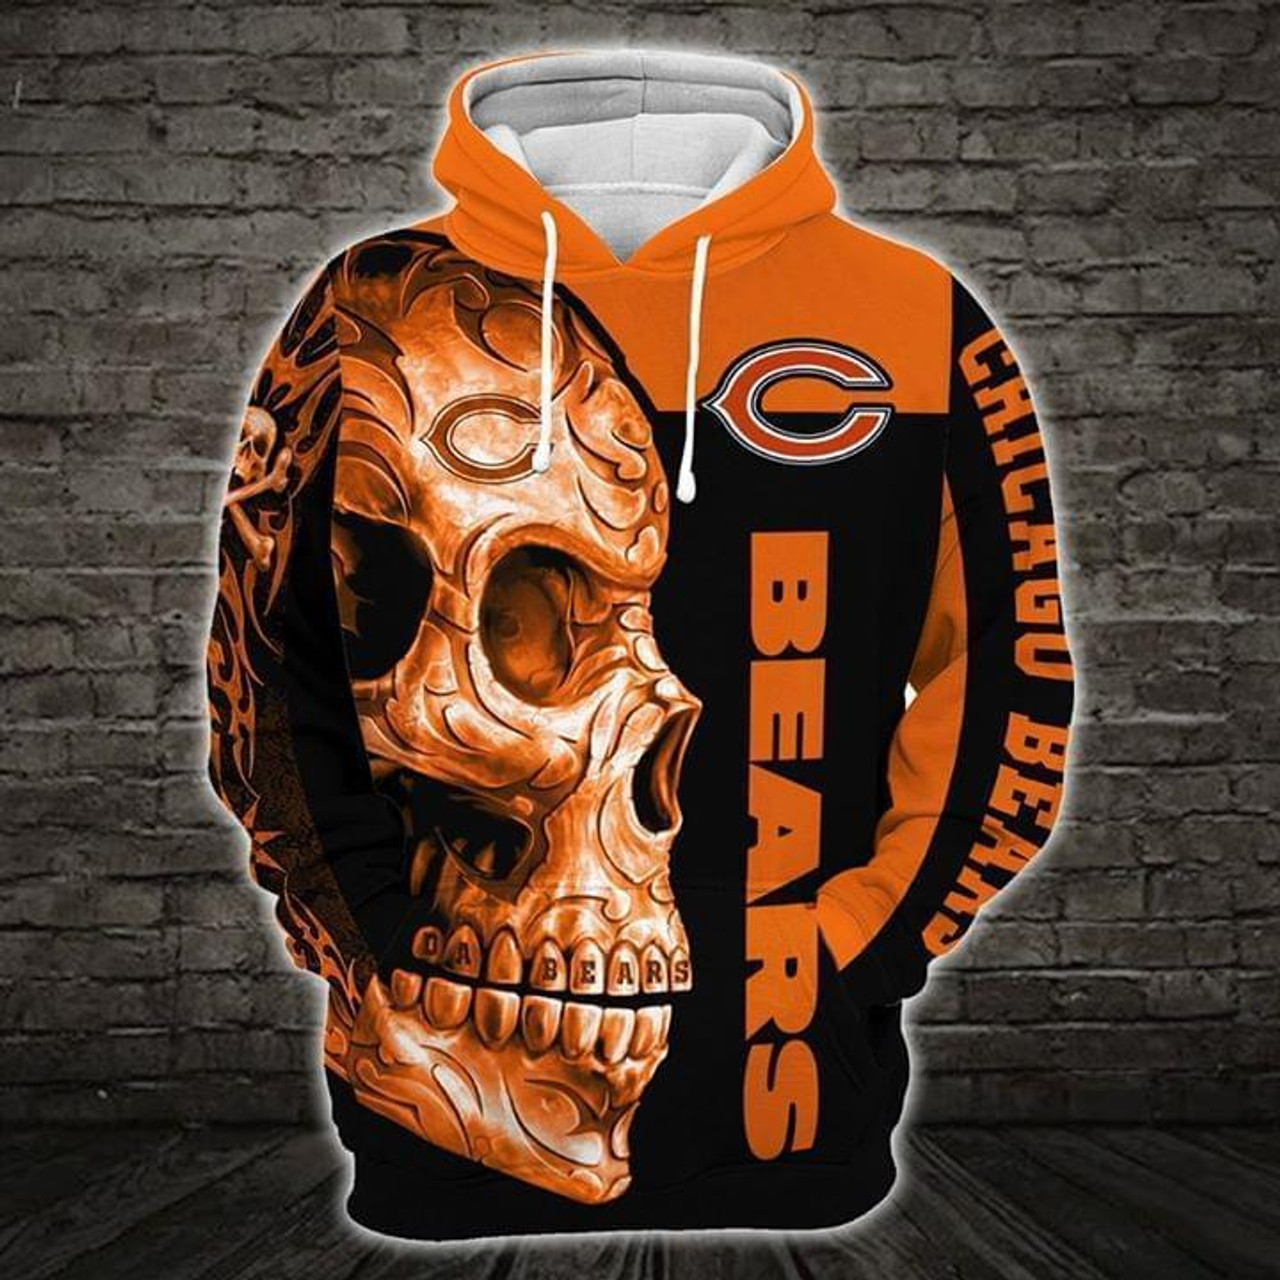 **(OFFICIAL-N.F.L.CHICAGO-BEARS-PULLOVER-HOODIES/BIG-3D-AZTEC-BEARS-TRIBAL-SKULL/OFFICIAL-CUSTOM-3D-BEARS-LOGOS & OFFICIAL-BEARS-TEAM-COLORS/CUSTOM-3D-GRAPHIC-PRINTED-DOUBLE-SIDED-ALL-OVER-DESIGN/WARM-PREMIUM-N.F.L.BEARS-TEAM-PULLOVER-HOODIES)**